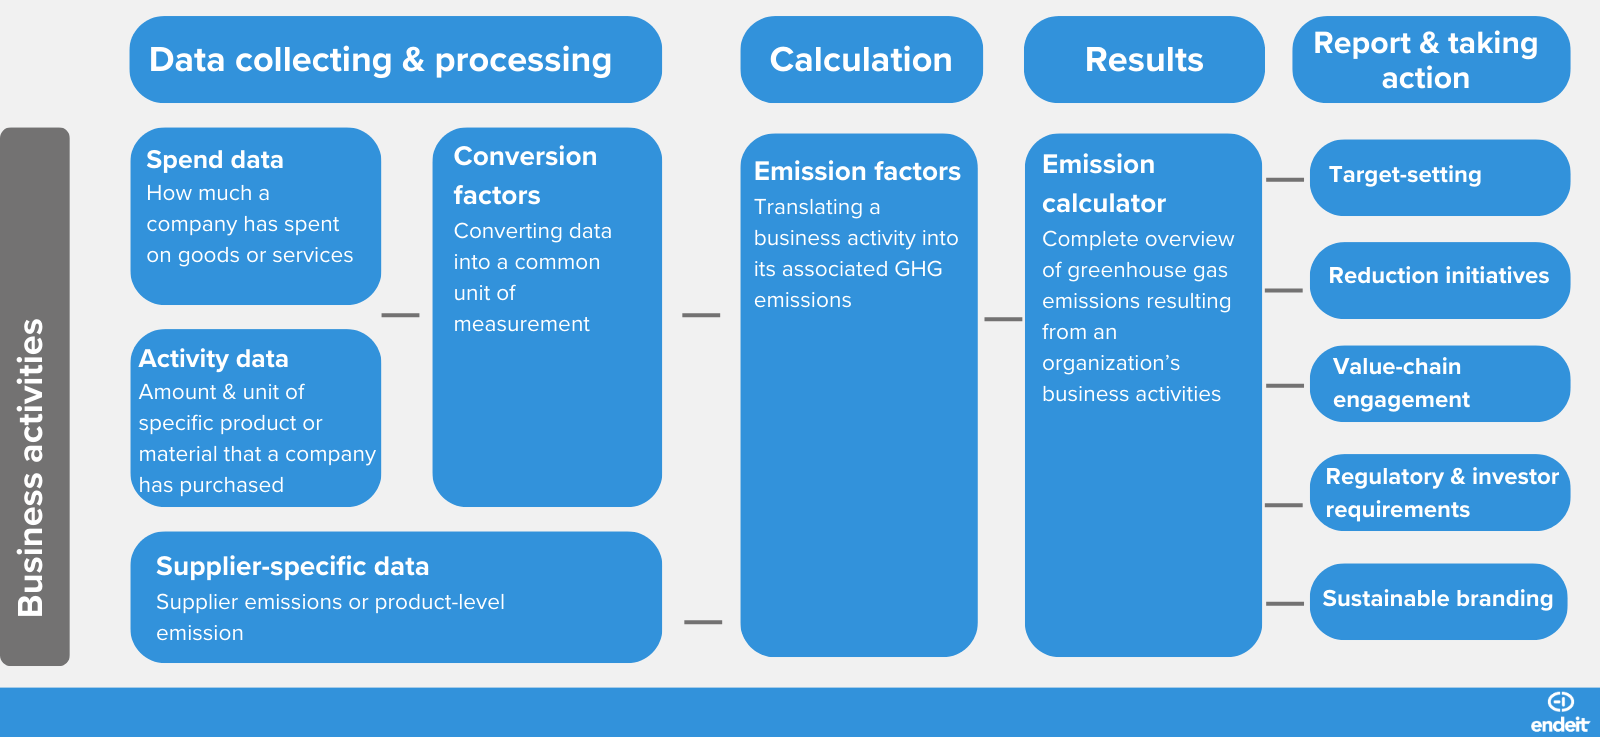 Graphic of data collection and management in carbon accounting